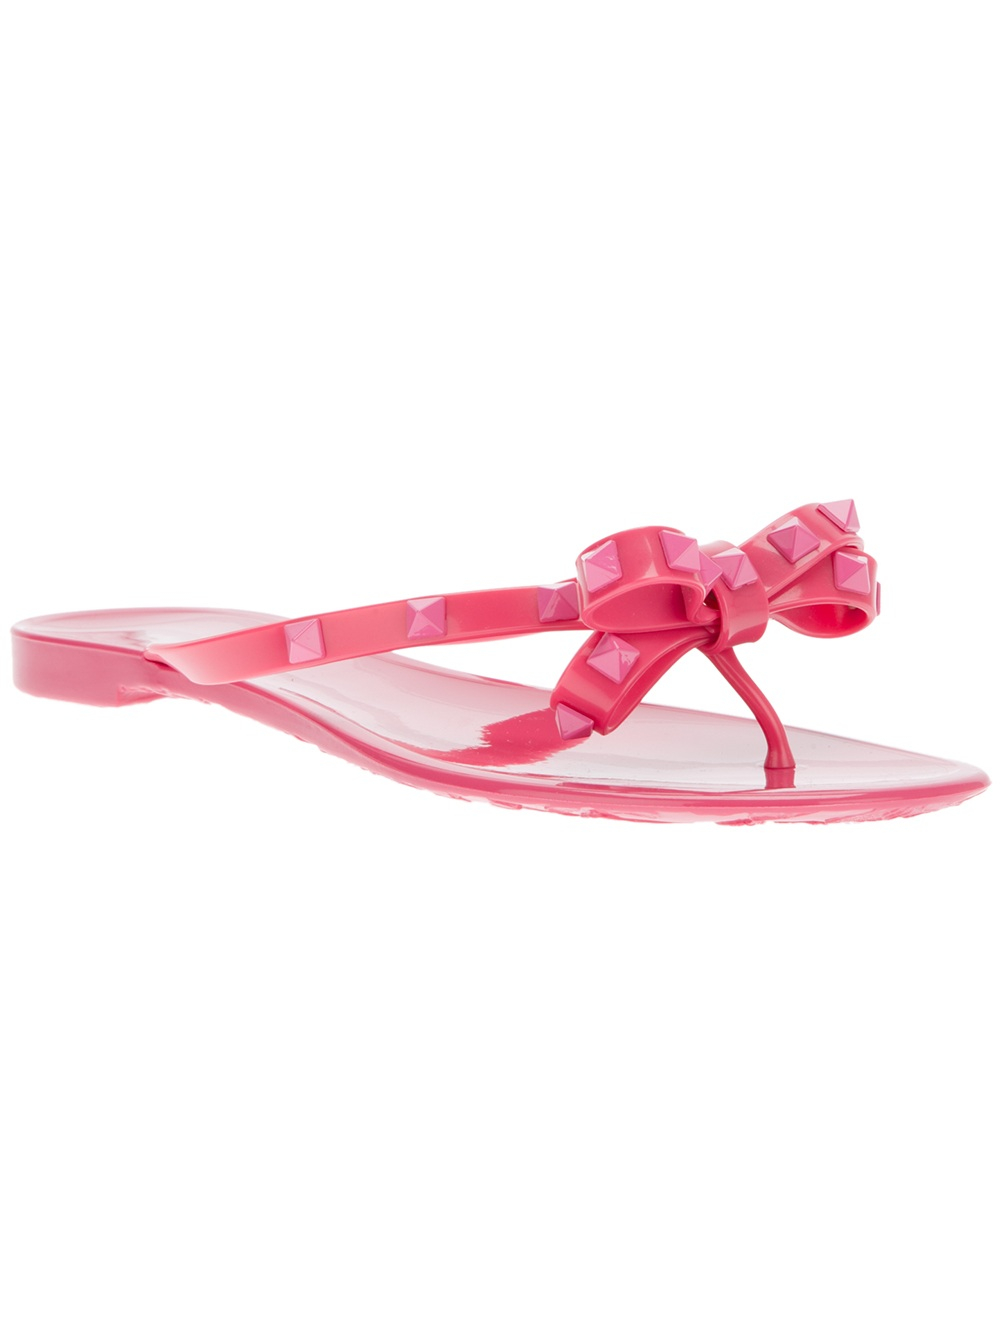 Lyst - Valentino Studded Sandal in Pink